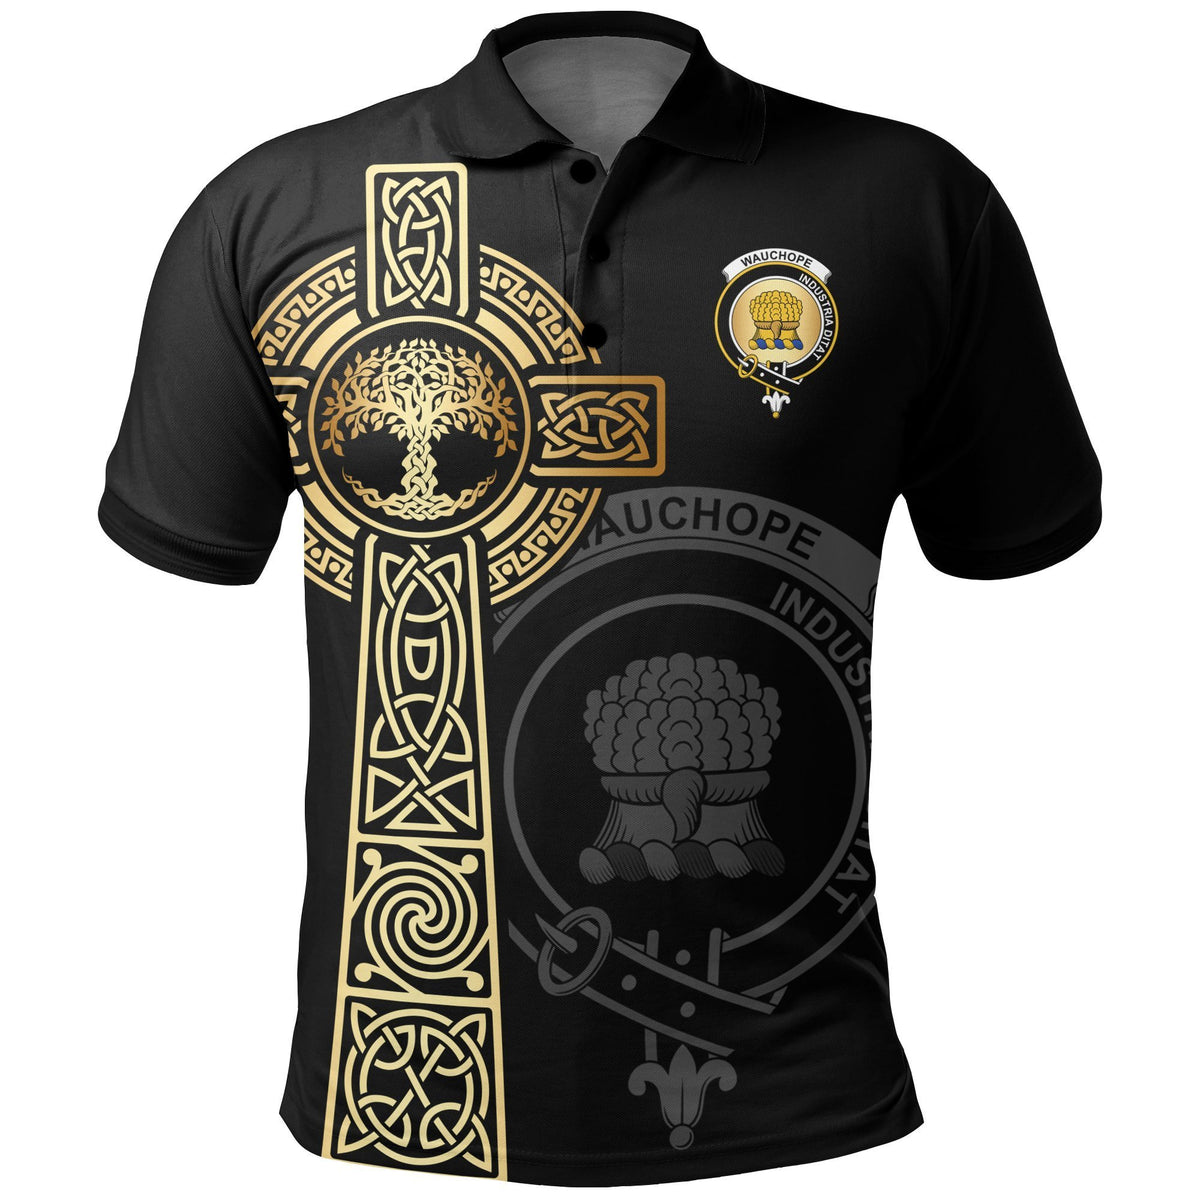 Wauchope (or Waugh) Clan Unisex Polo Shirt - Celtic Tree Of Life